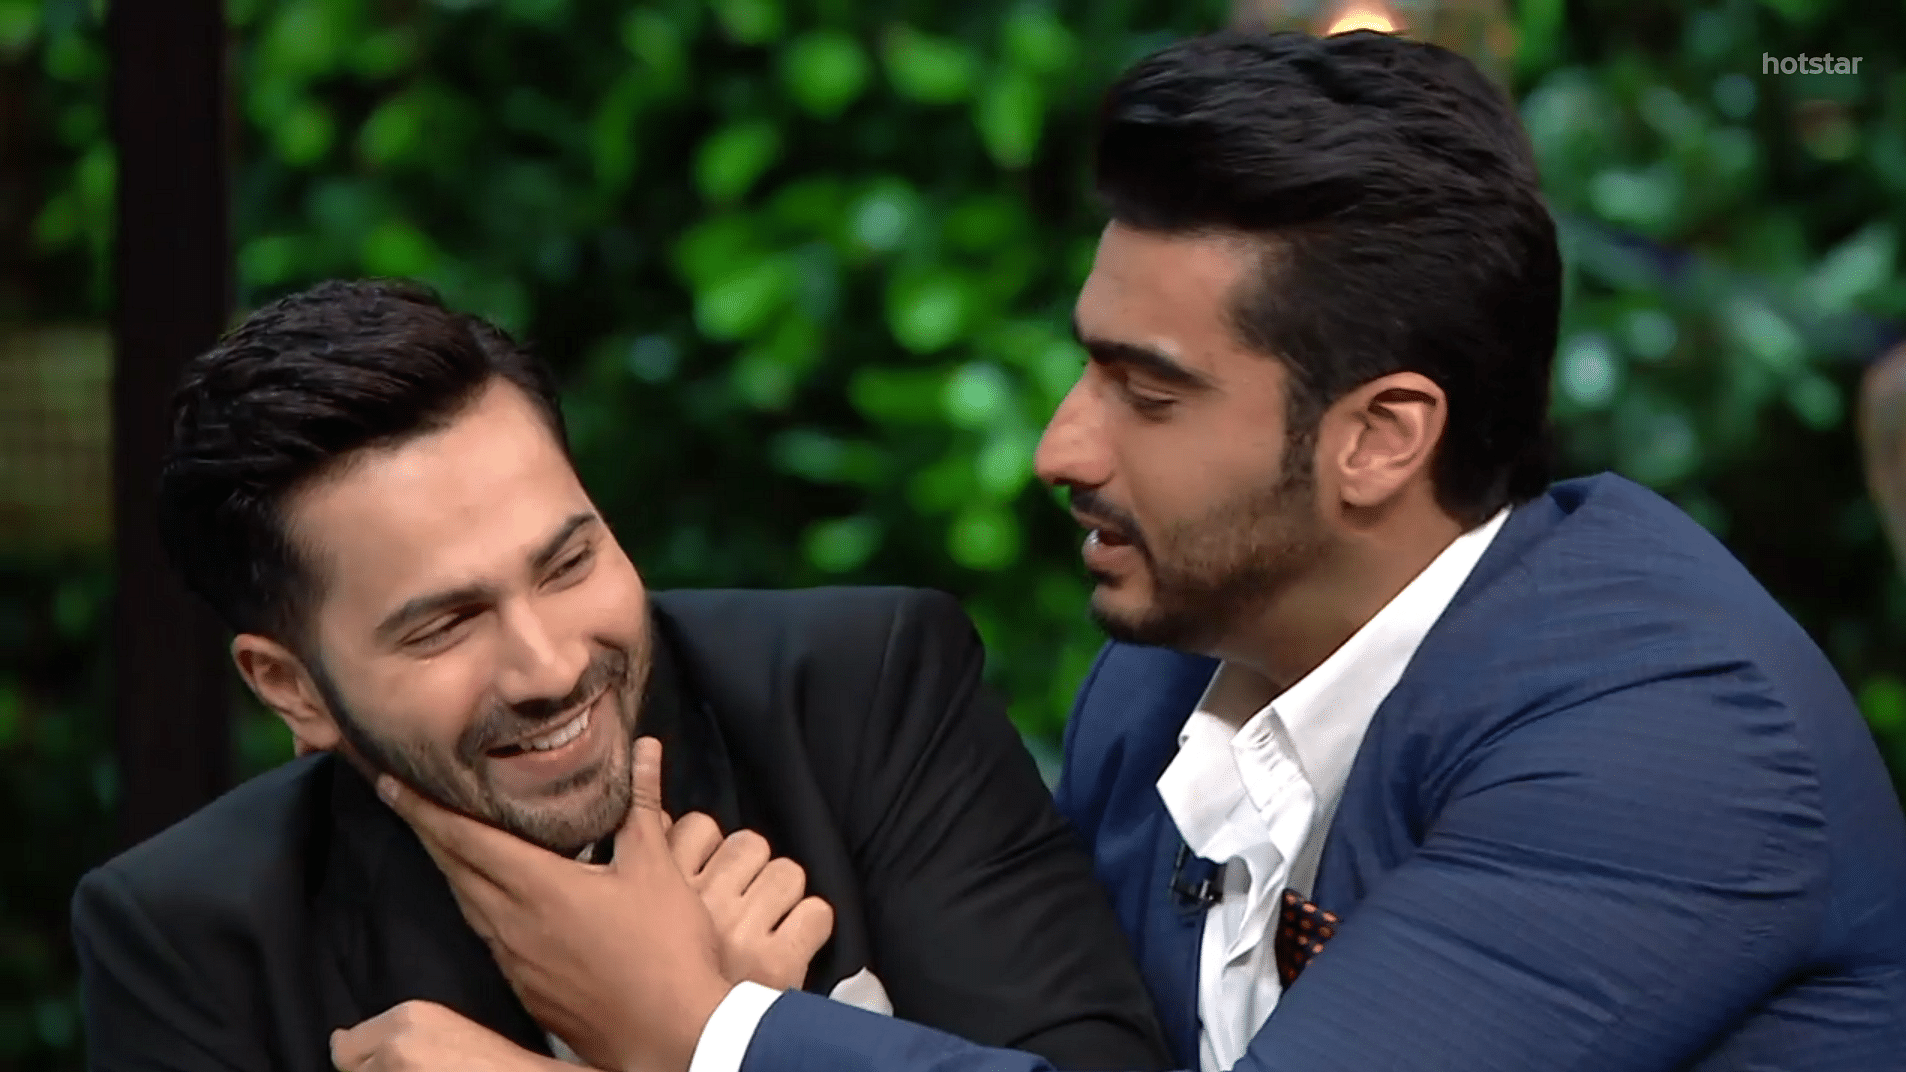 Varun Dhawan and Arjun Kapoor have some serious bromance going on. (Photo courtesy: Hotstar/<i>Koffee With Karan</i>)